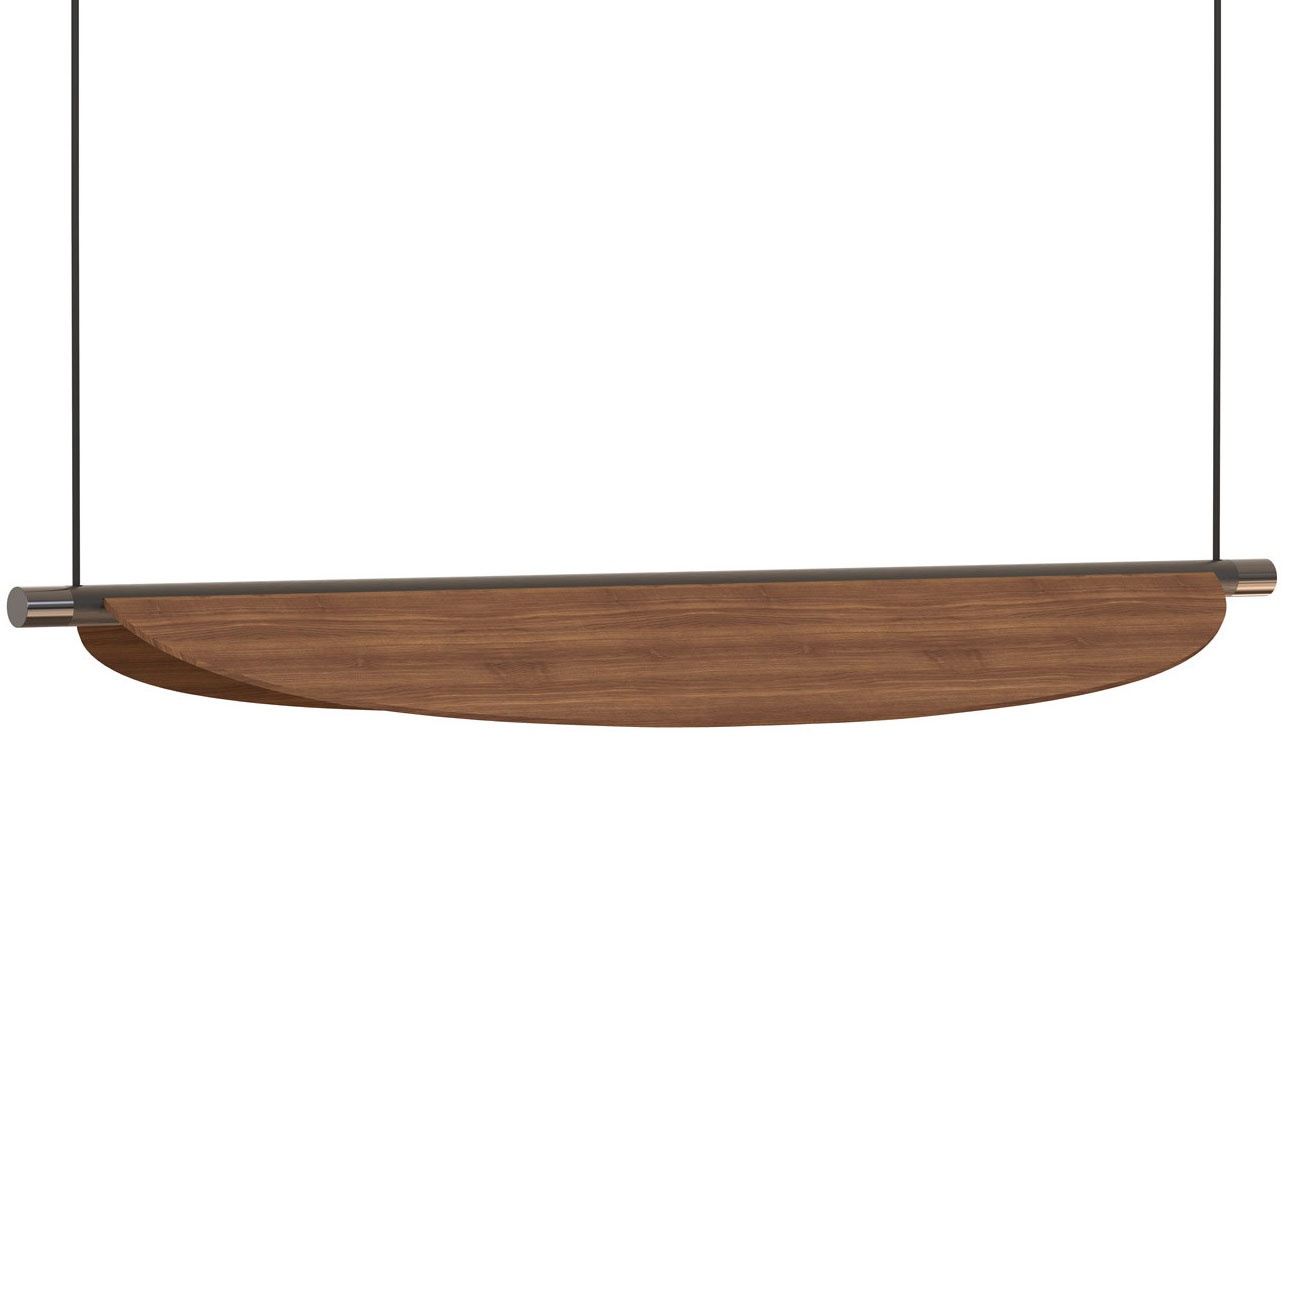 Thula Linear Pendant by Tooy | 562.23-C22+C22-W02 | TOY1140297